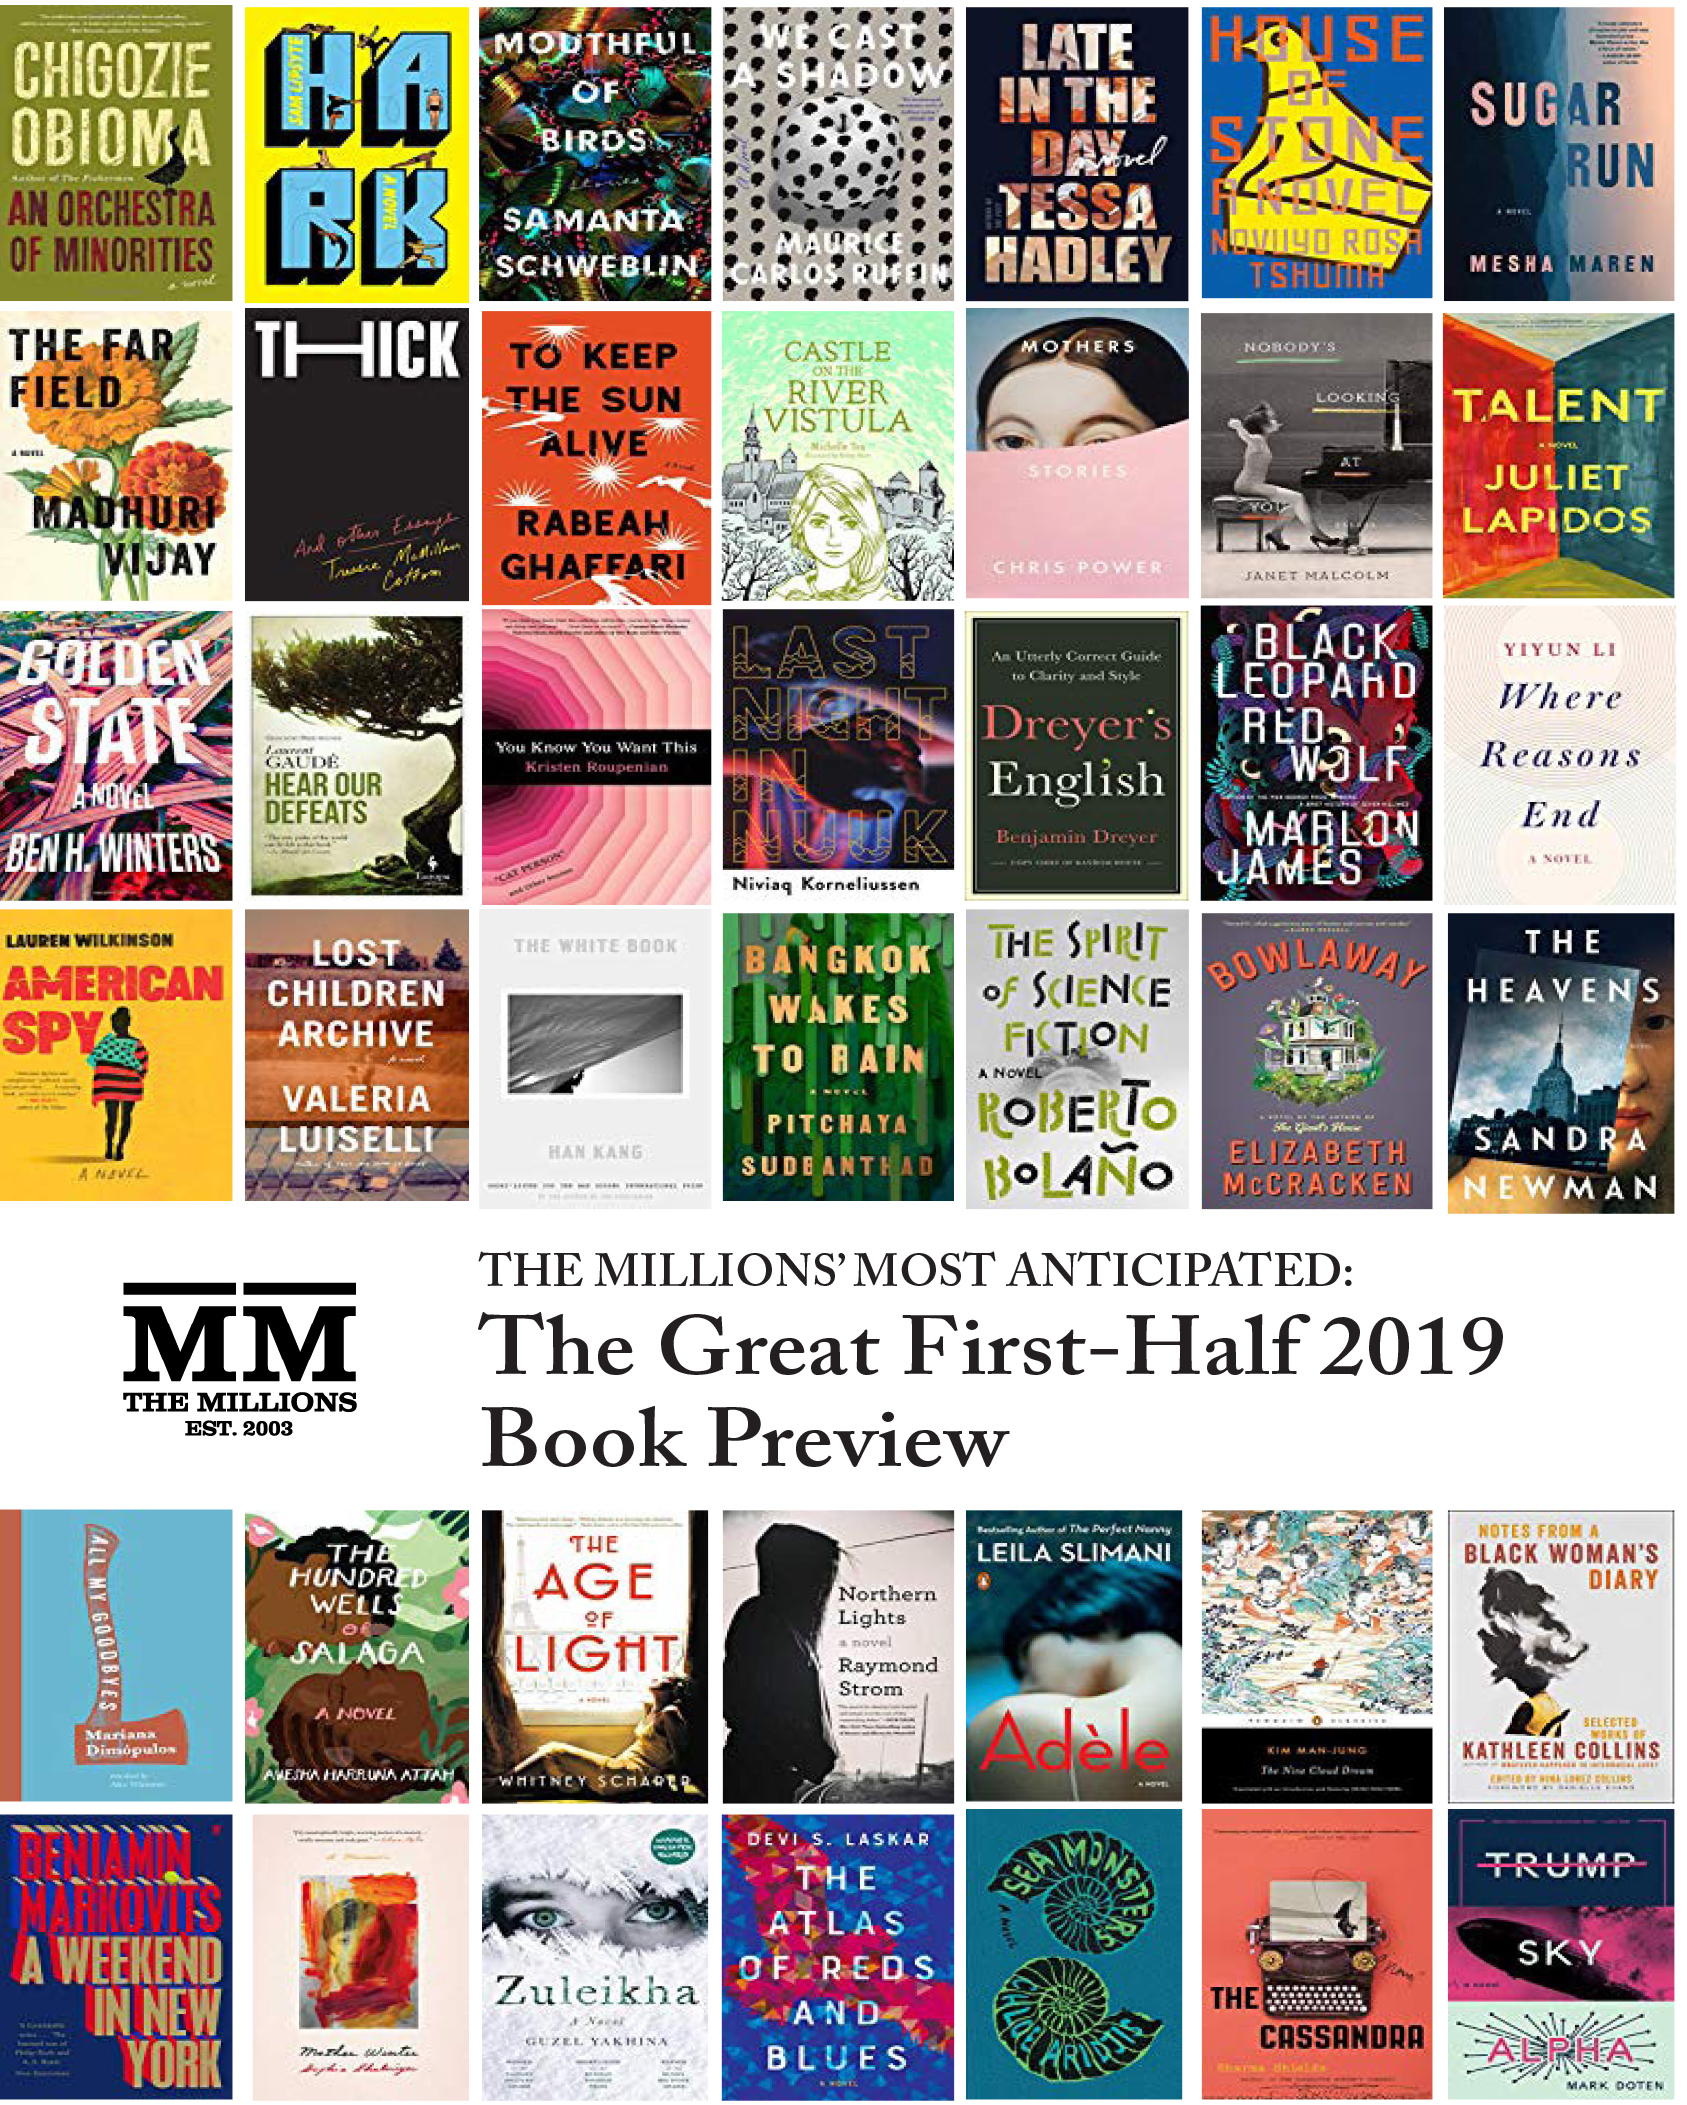 Most Anticipated The Great First-Half 2019 Book Preview picture